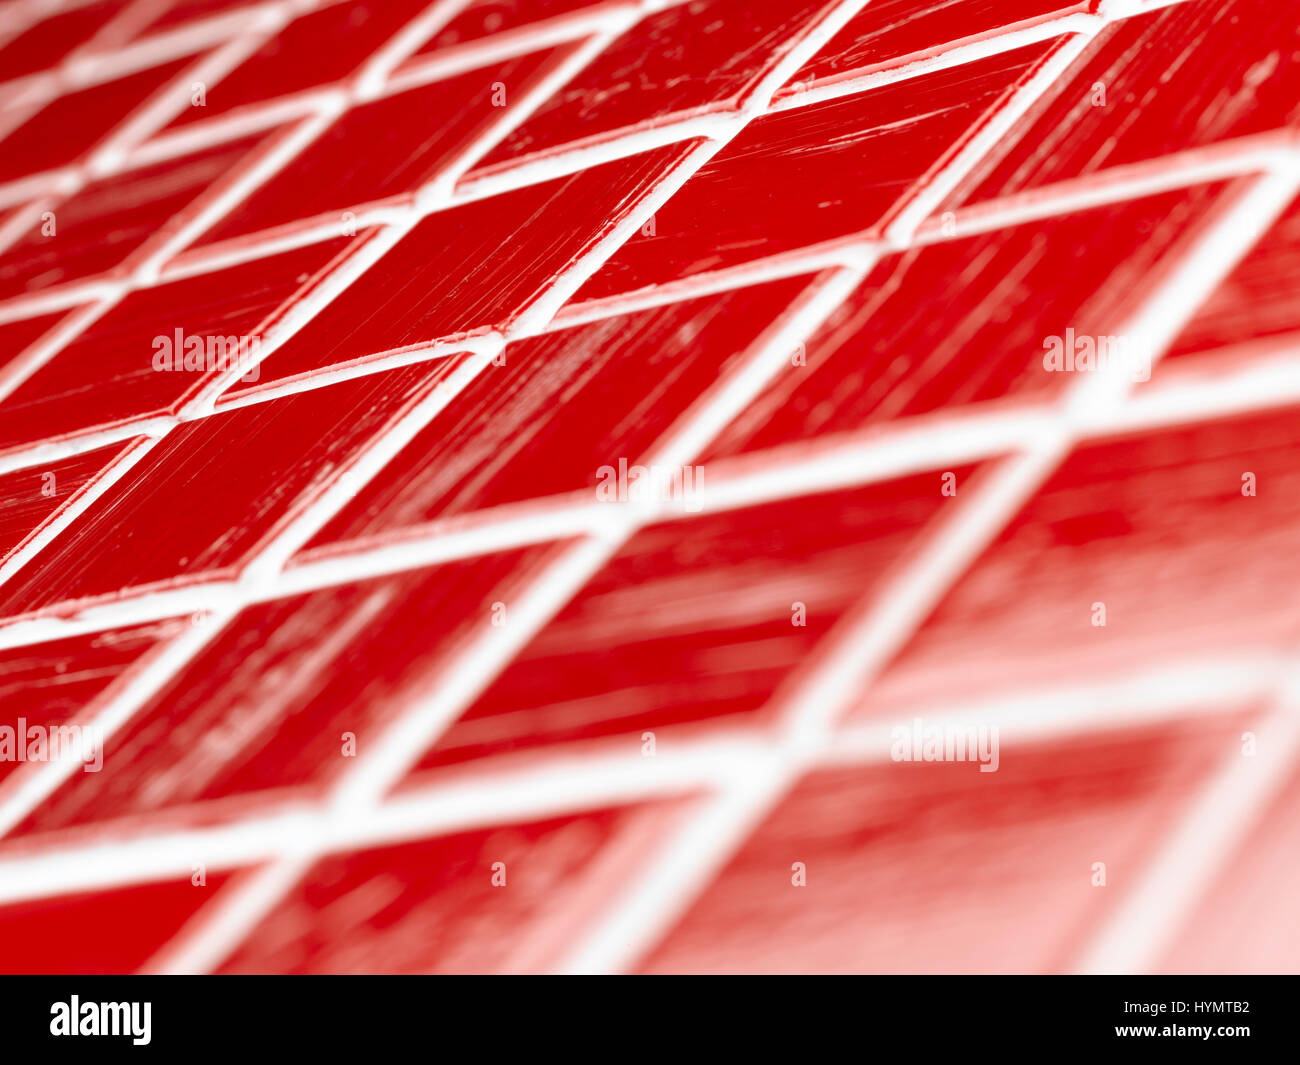 Red Mosaic tile background Stock Photo